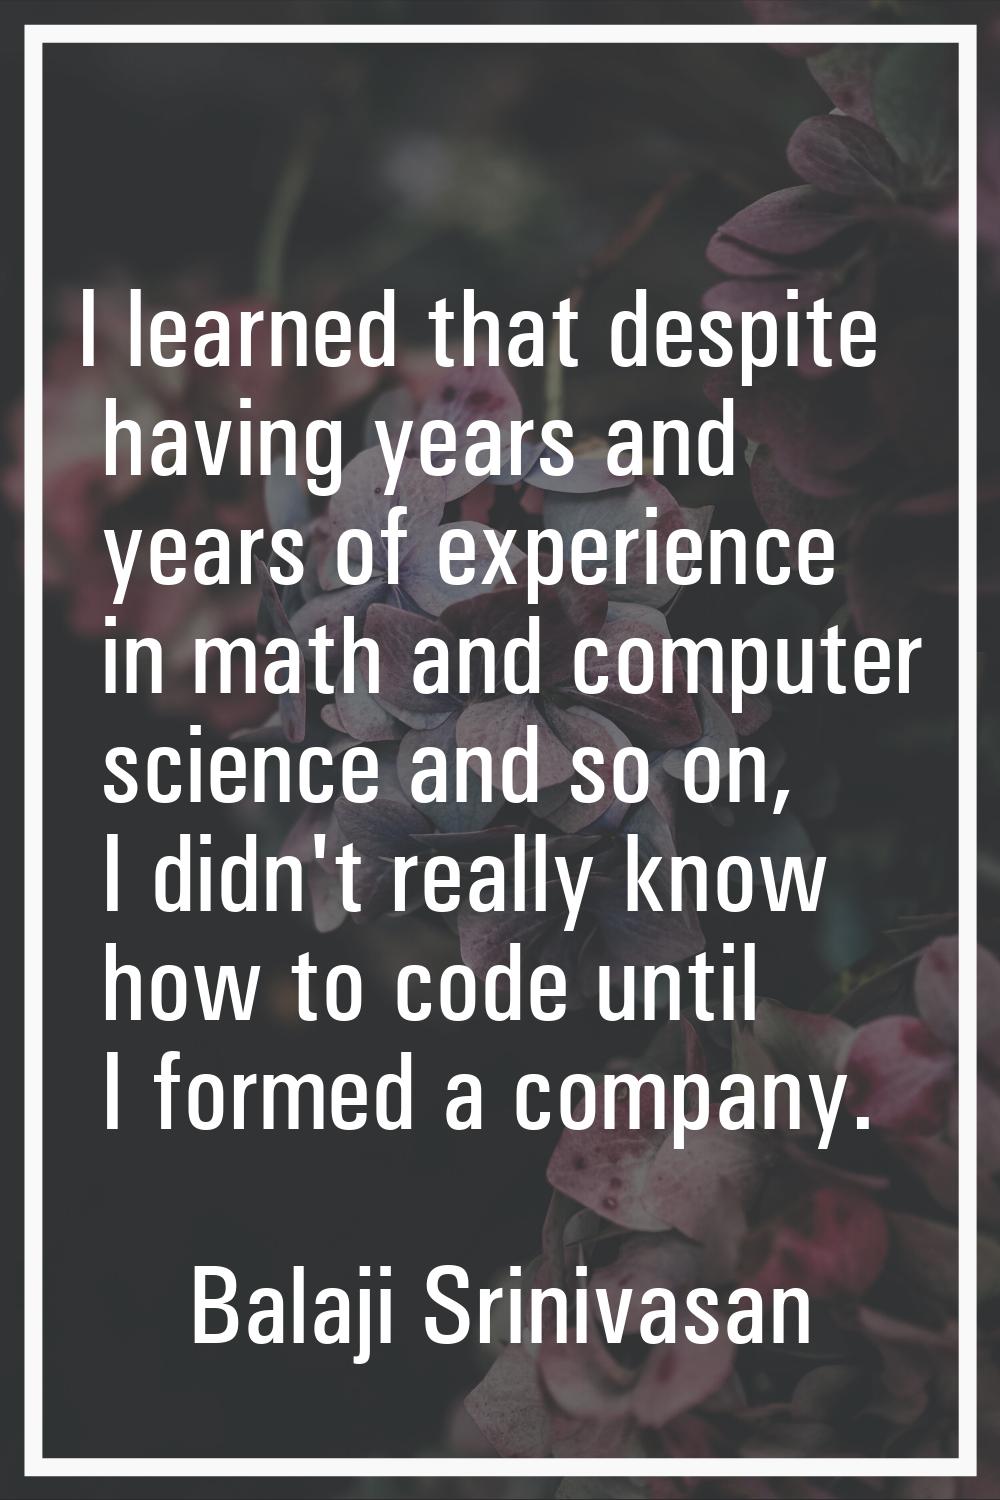 I learned that despite having years and years of experience in math and computer science and so on,